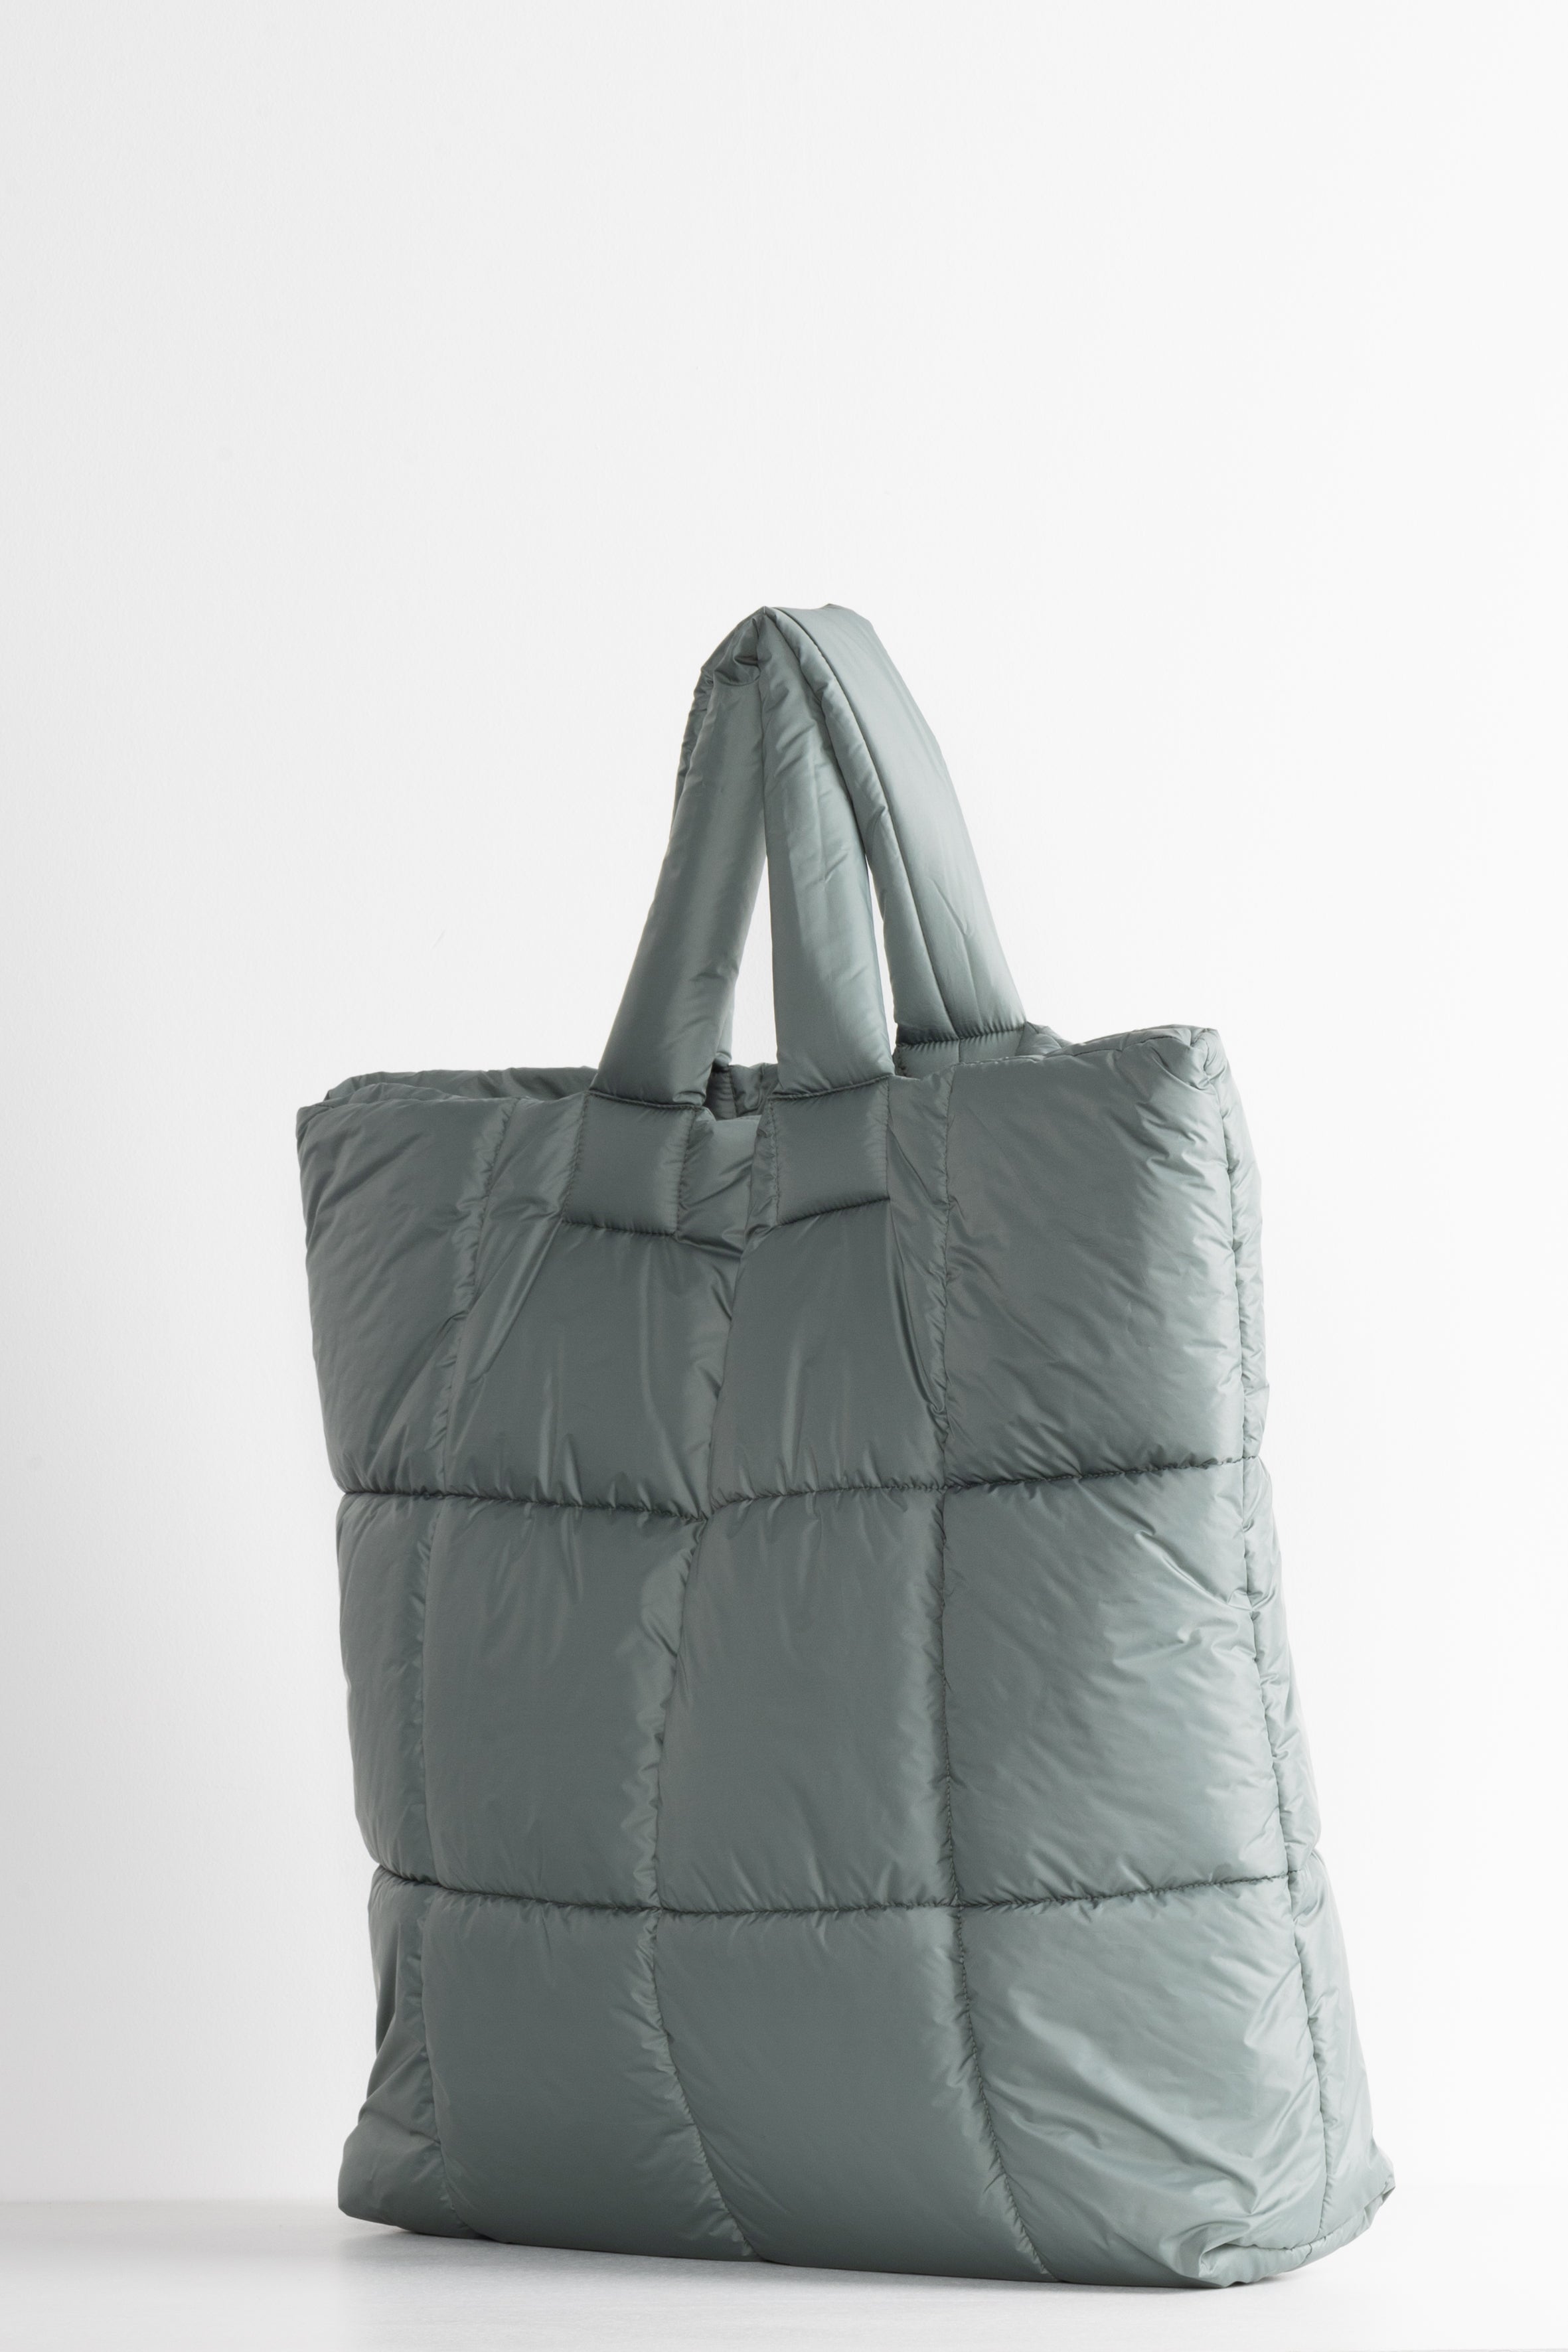 oversized Lempelius Puffer bag in the color sage